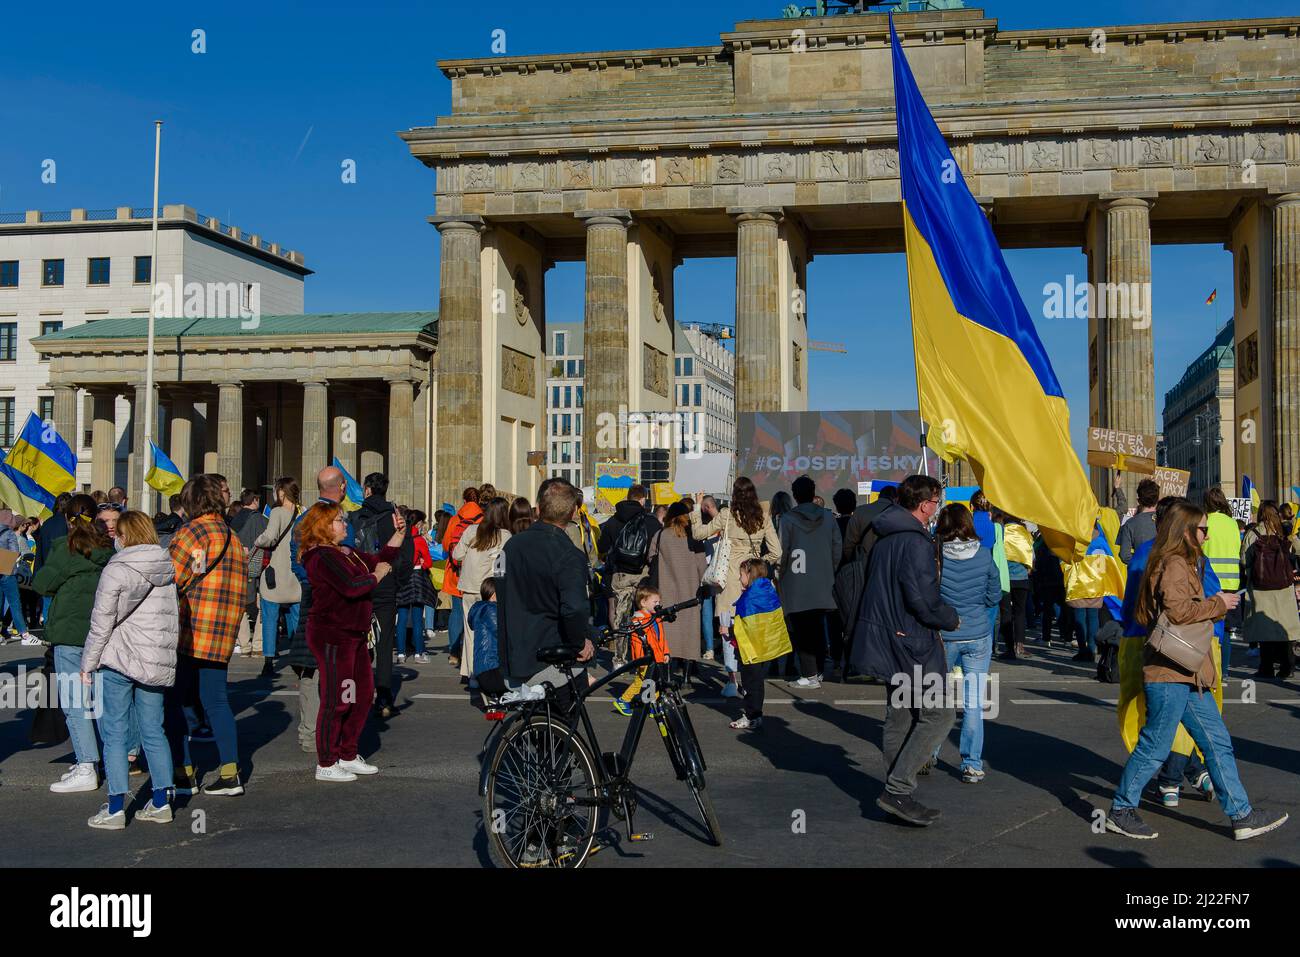 People in front of the Brandenburg Gate in Berlin Germany demonstrate against the war in Ukraine Stock Photo